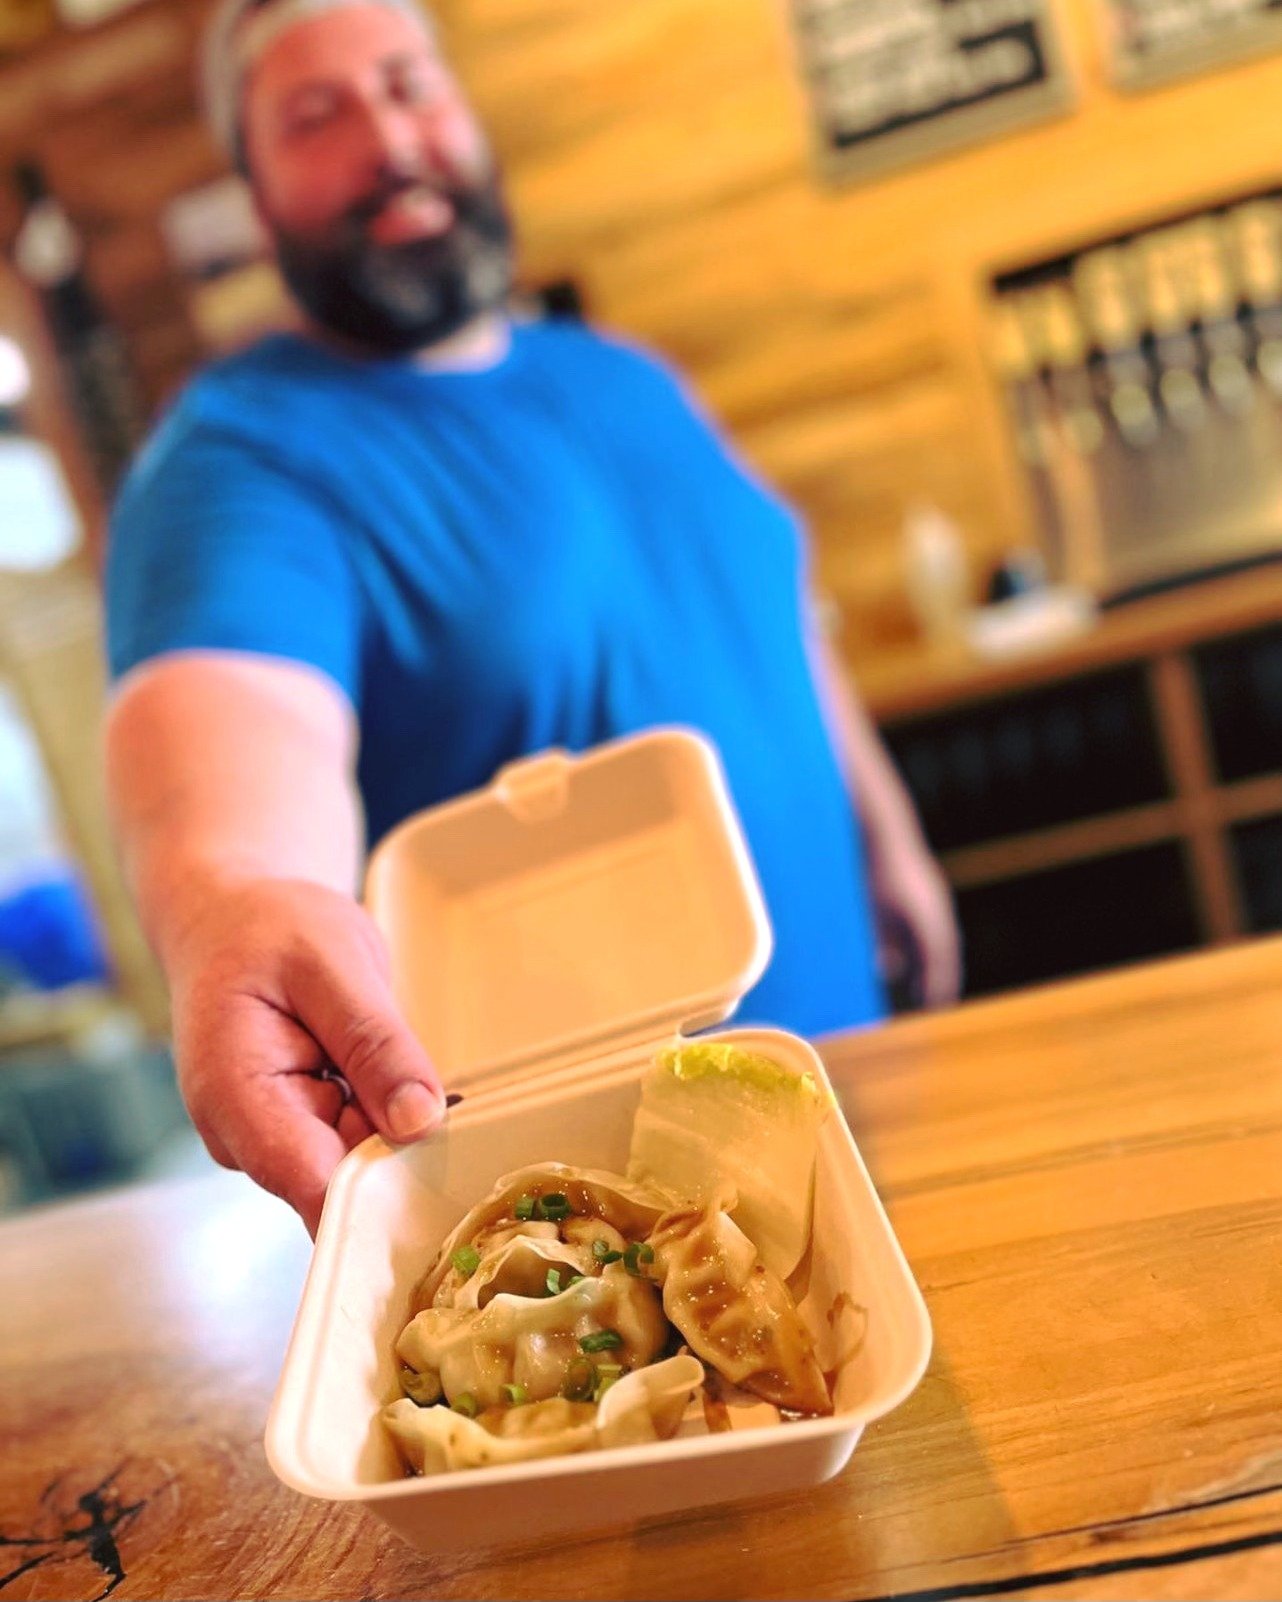 Join us and @fatkidculinaryproductions TODAY from 3-8pm for some delicious dumplings that are guaranteed to blow your mind. Check out some of his past work and the menu for tonight 🥟

#dumplingdays #fridayfunday #freakinweekend #craftbeer #brewery #